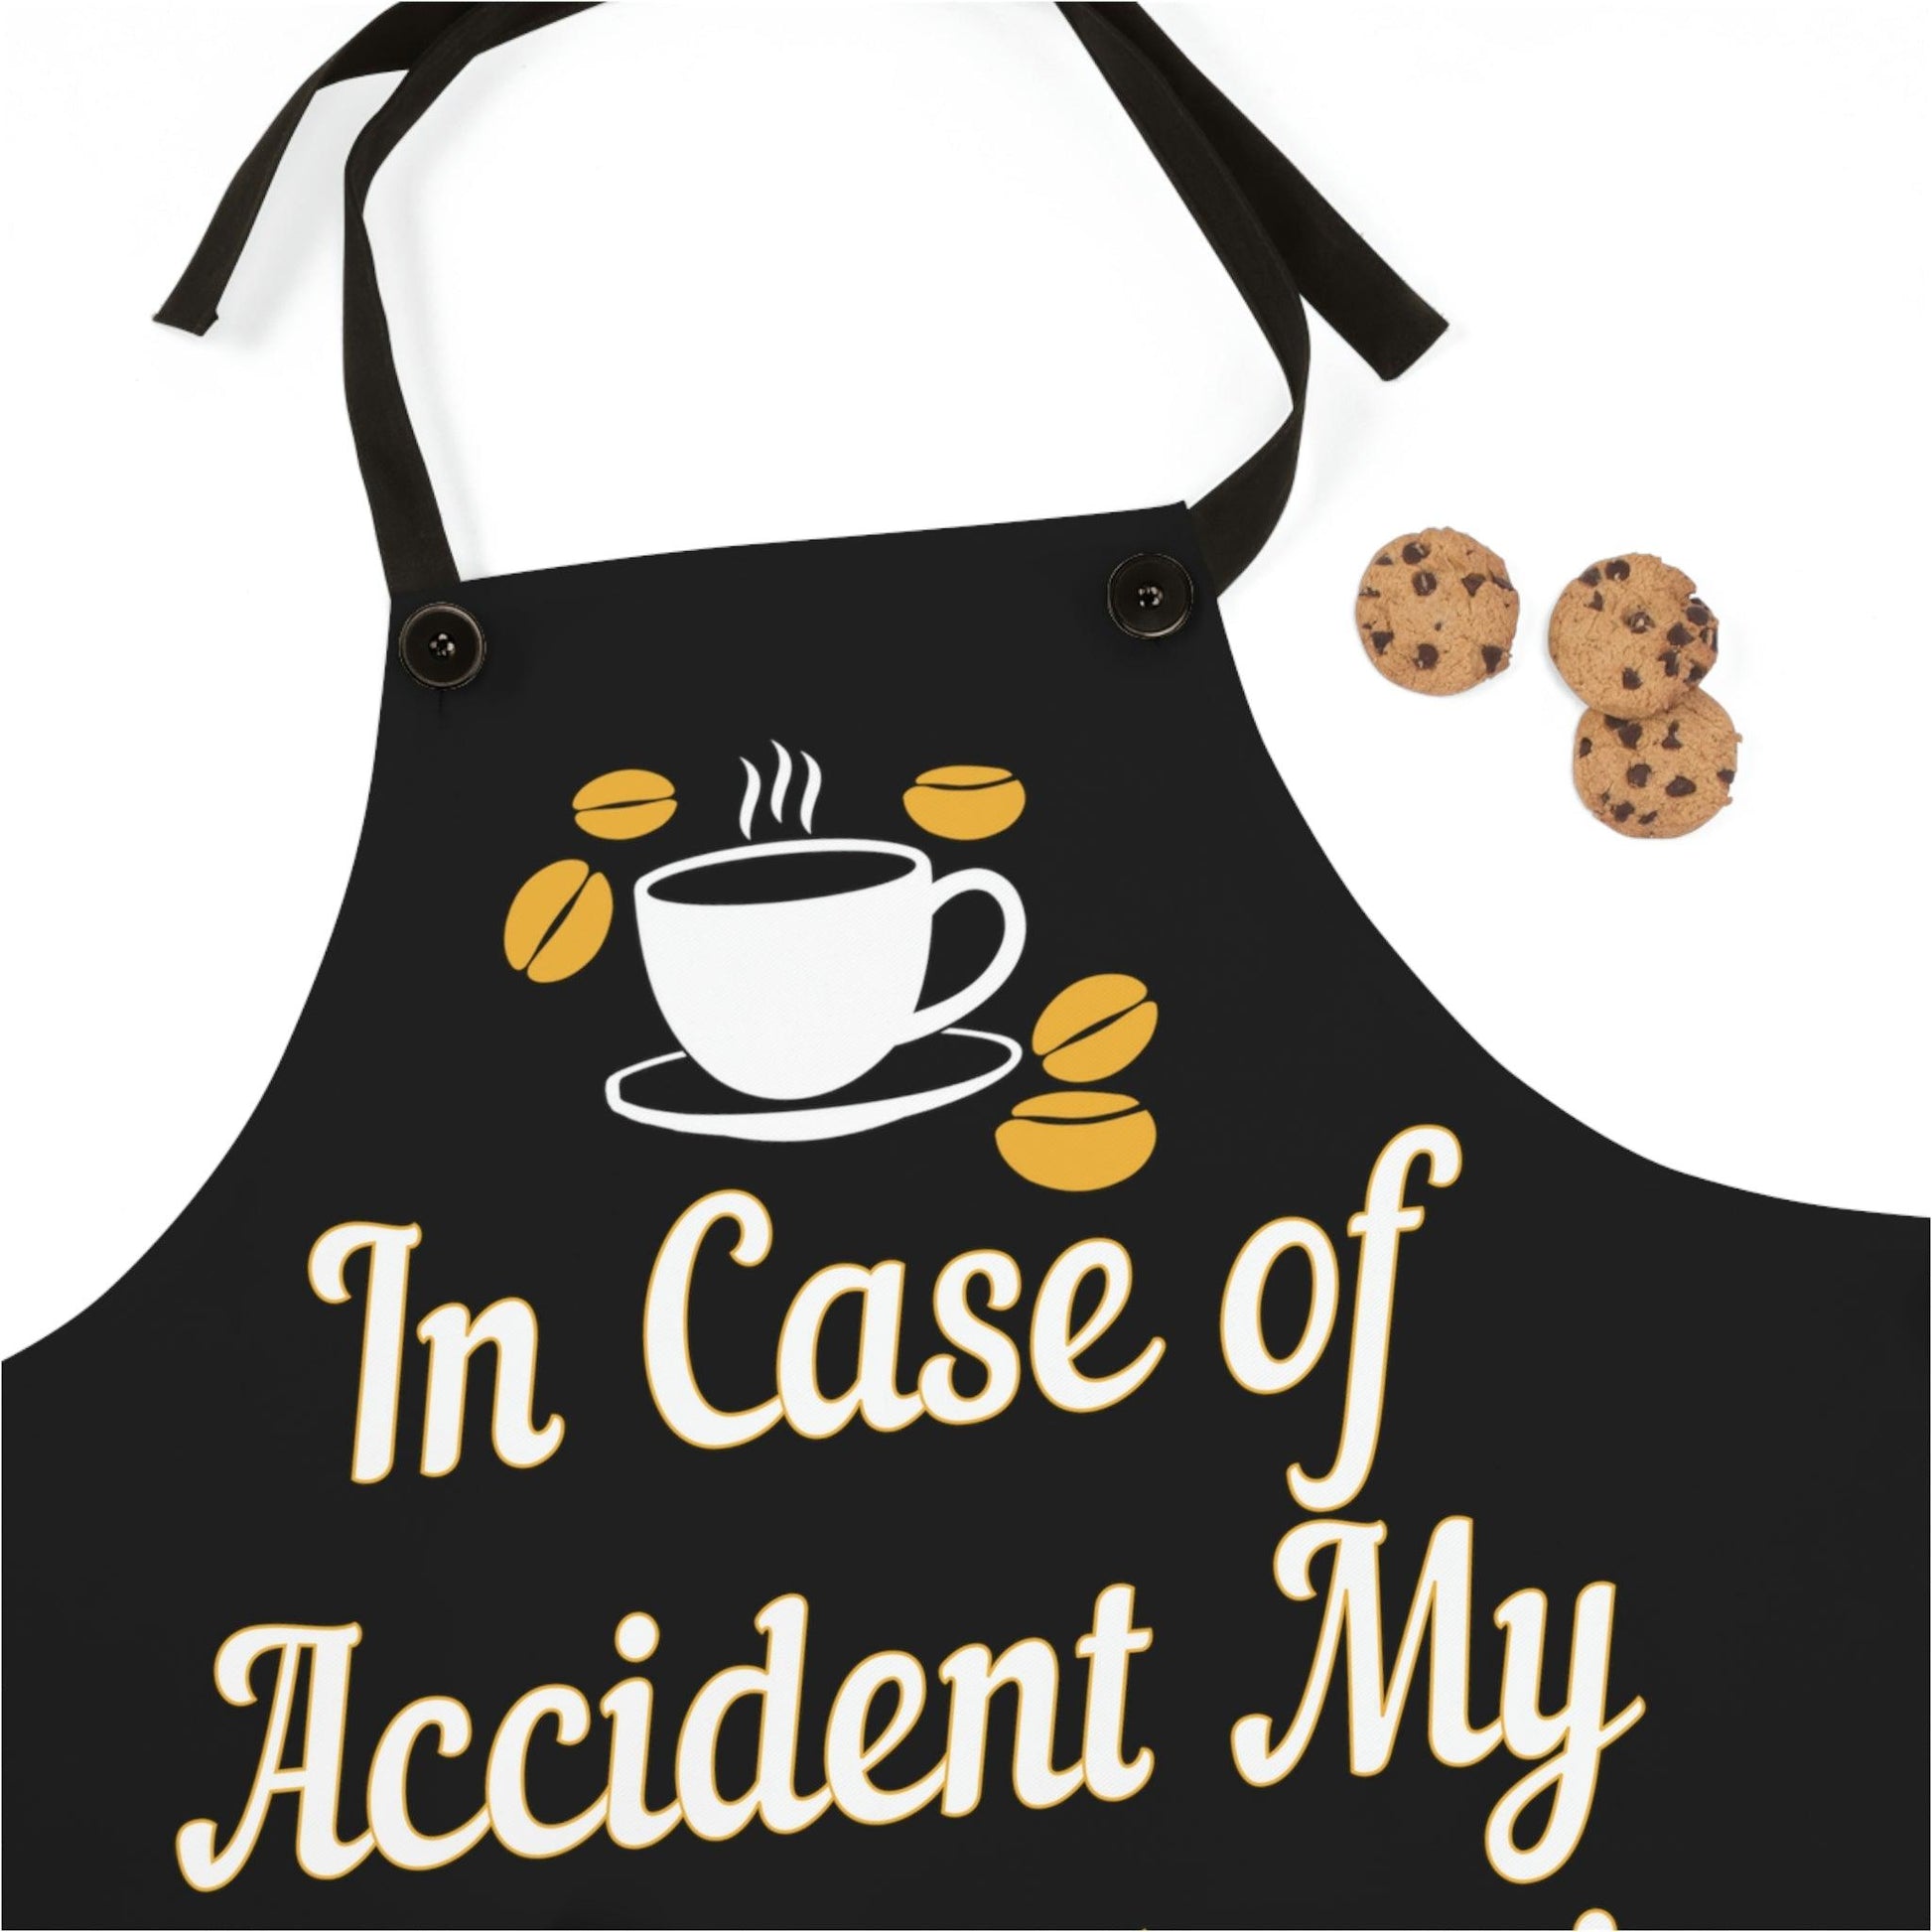 In case of accident my blood type is Coffee Apron - Giftsmojo